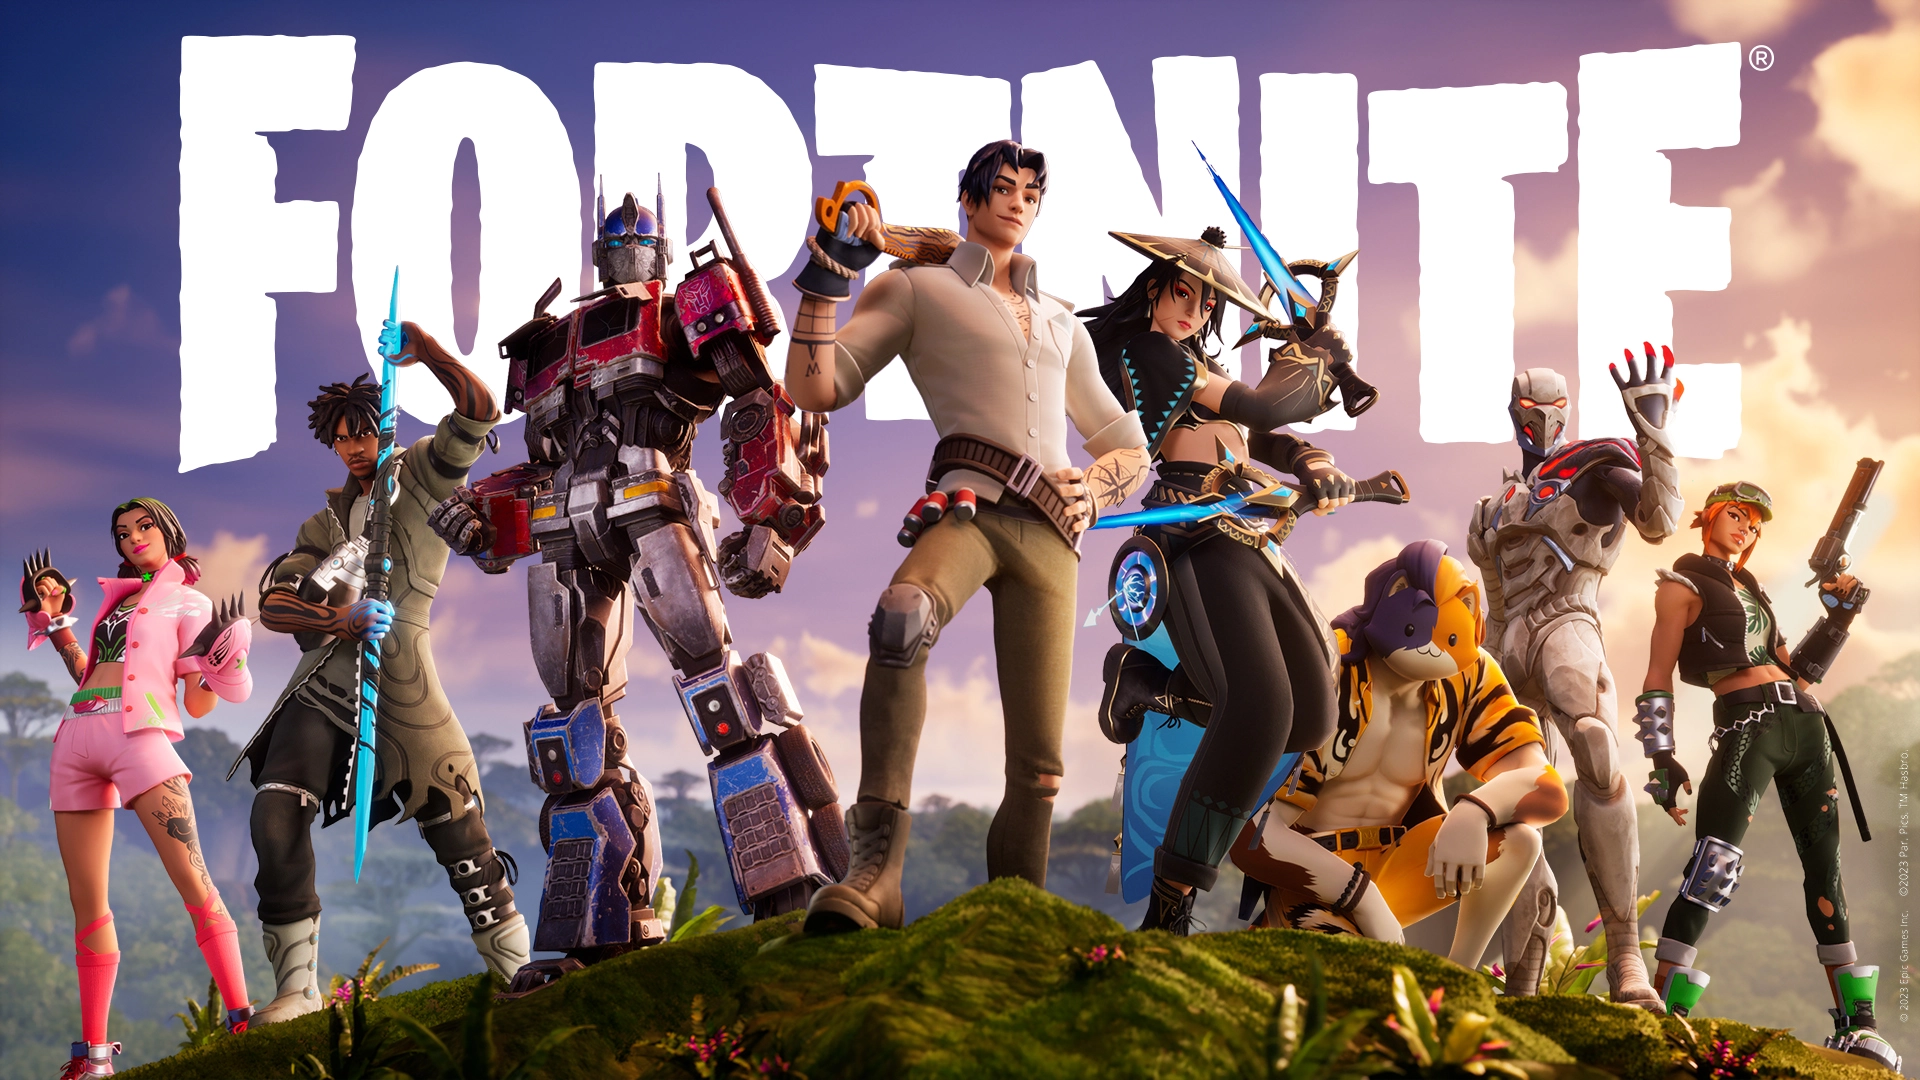 How to contact Epic Games support regarding Fortnite? » TalkEsport